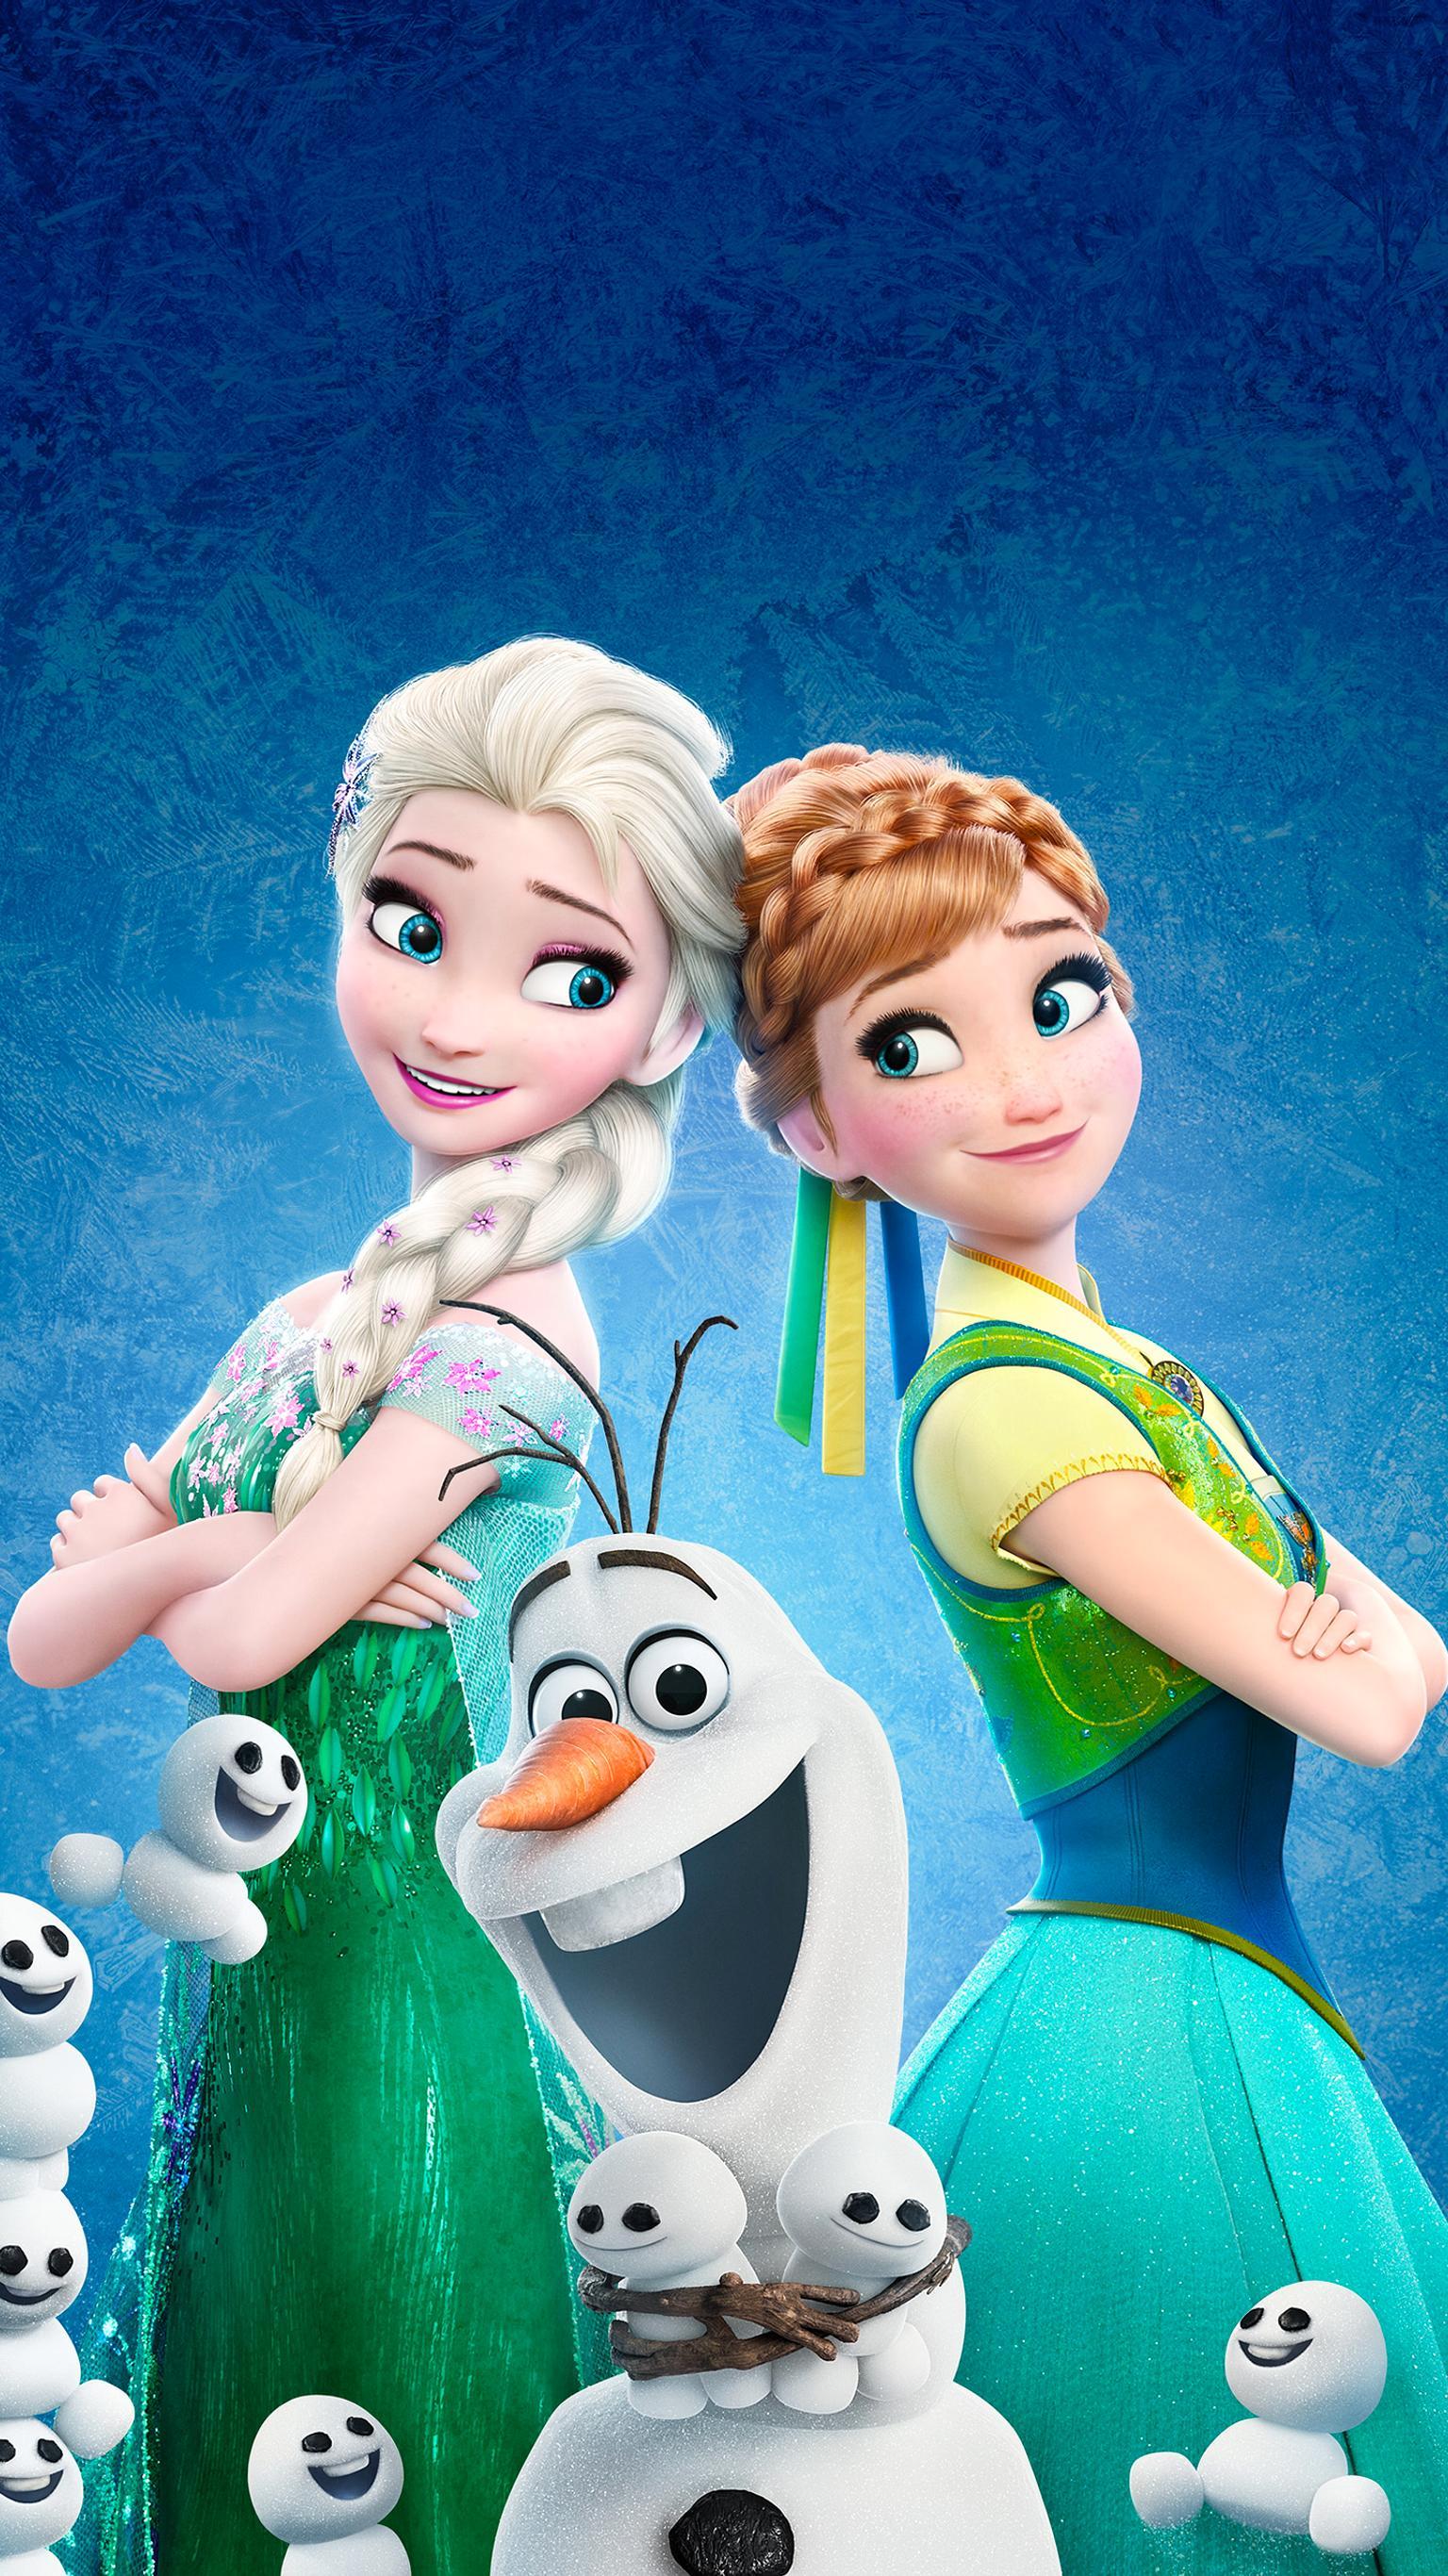  Frozen Olaf Wallpapers on 